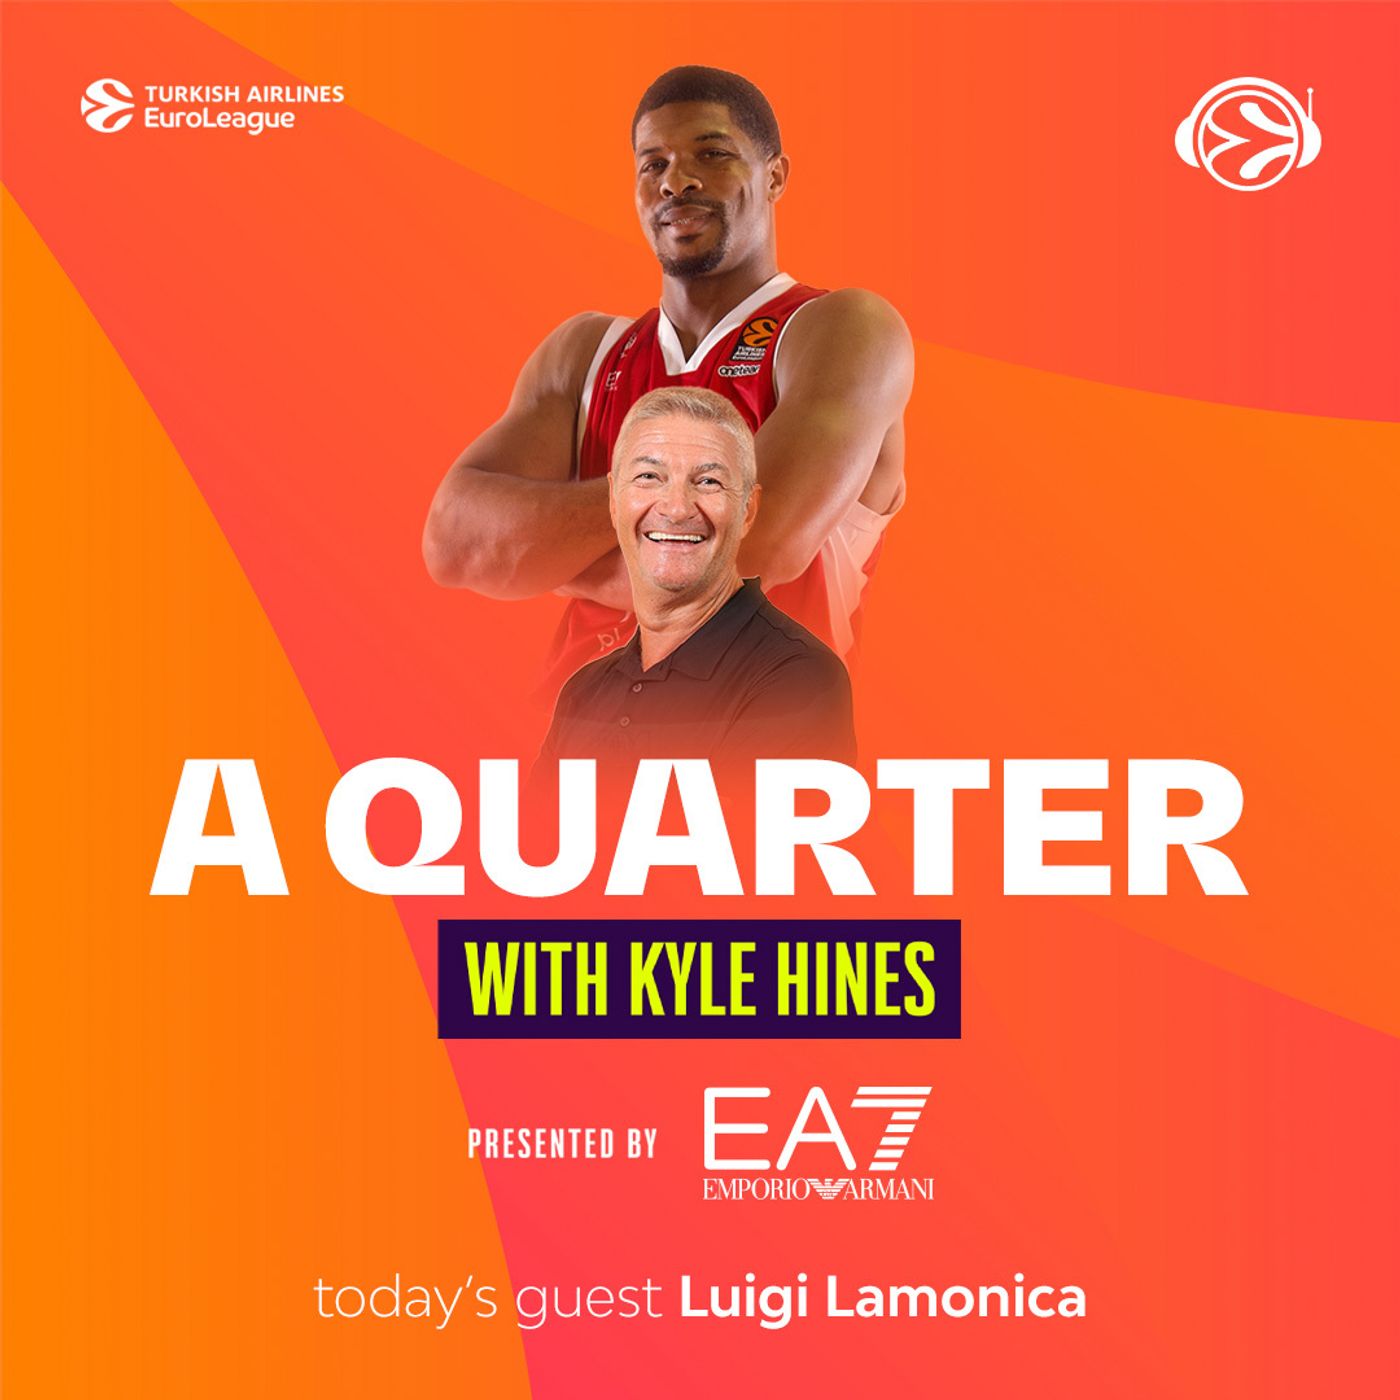 S5 Ep2: A Quarter with Kyle Hines and Luigi Lamonica